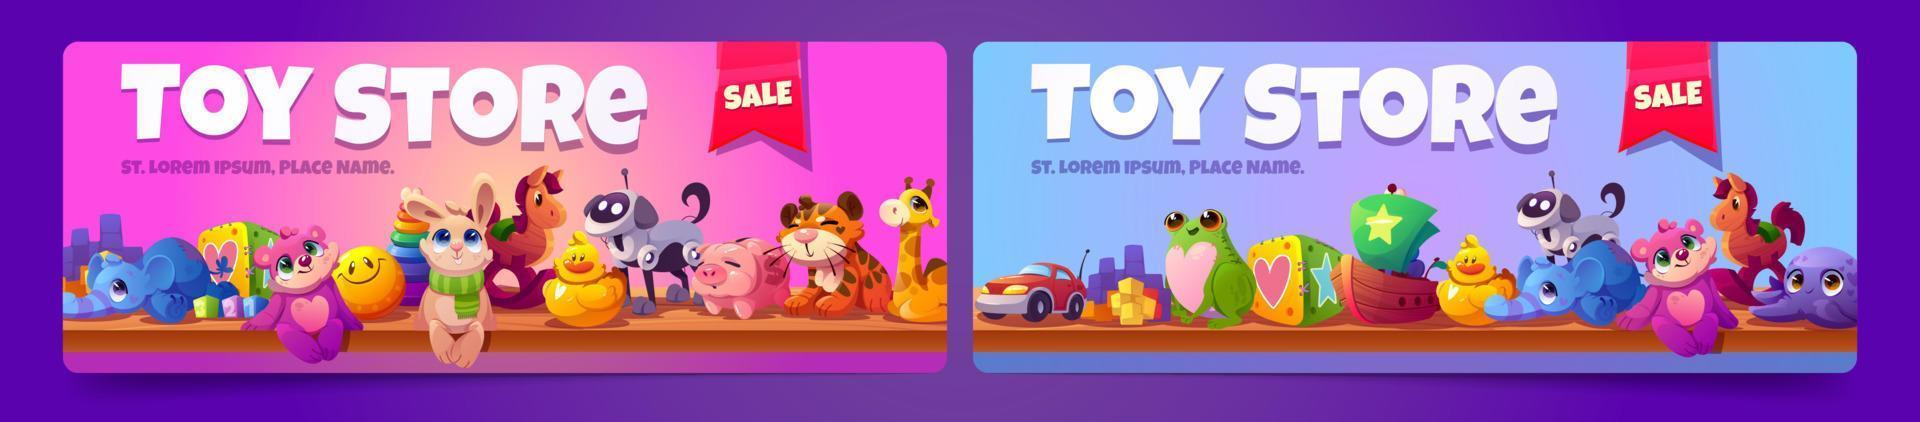 Banners of kids toys sale in baby store vector